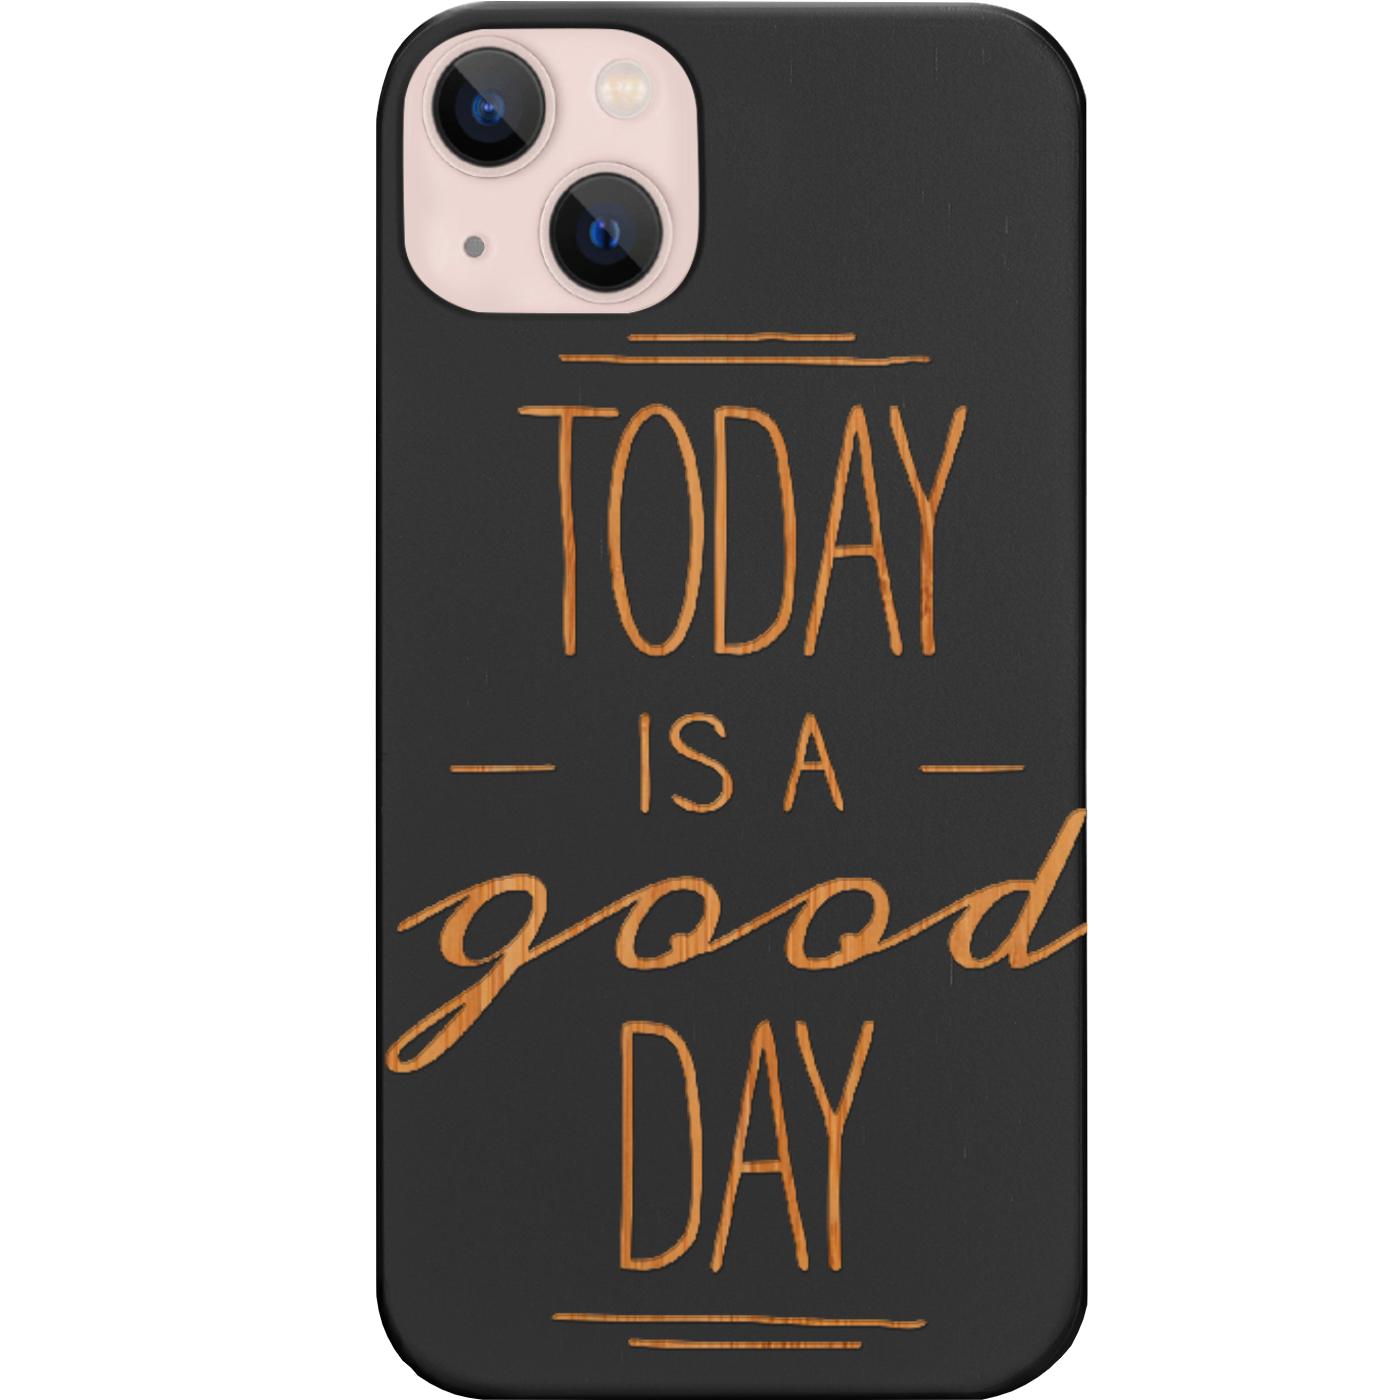 Today is a Good Day - Engraved Phone Case